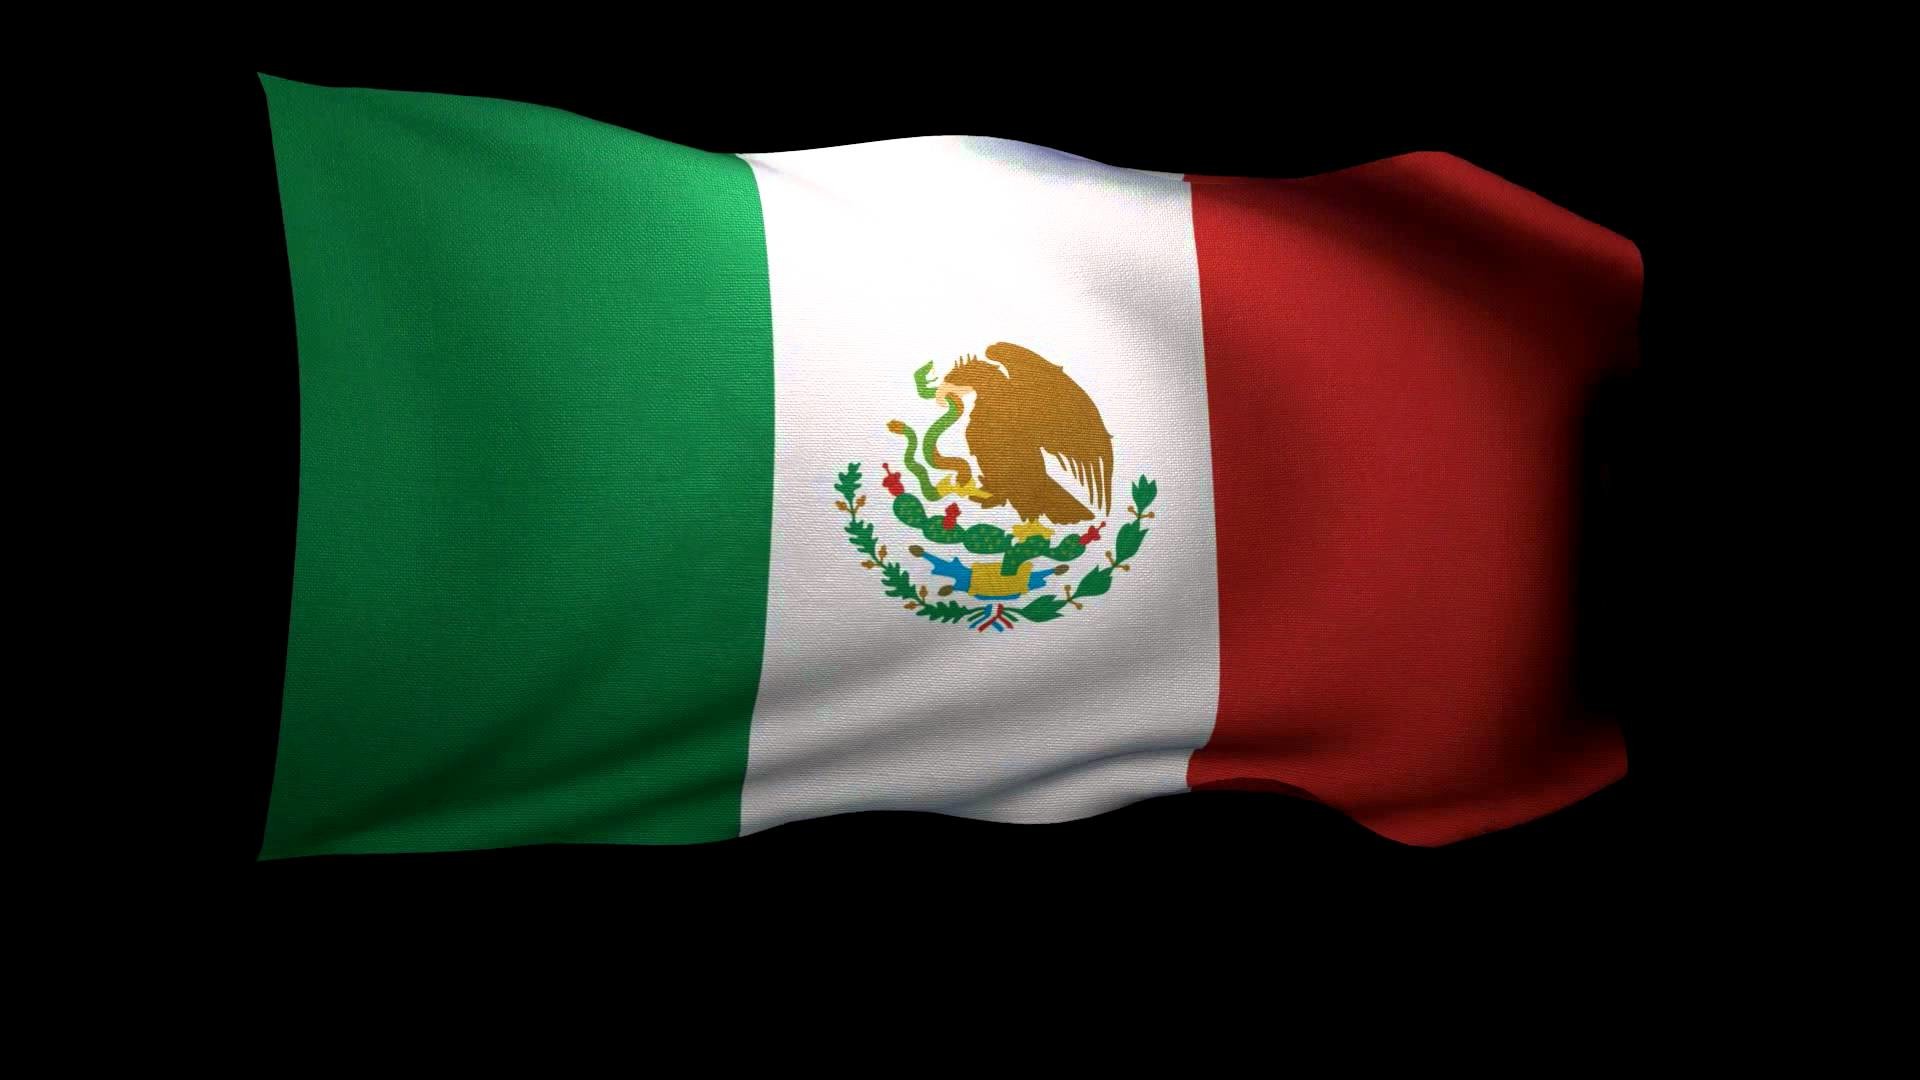 1920x1080 Perspective Pictures Of Mexican Flags The Interestingly Gripping .